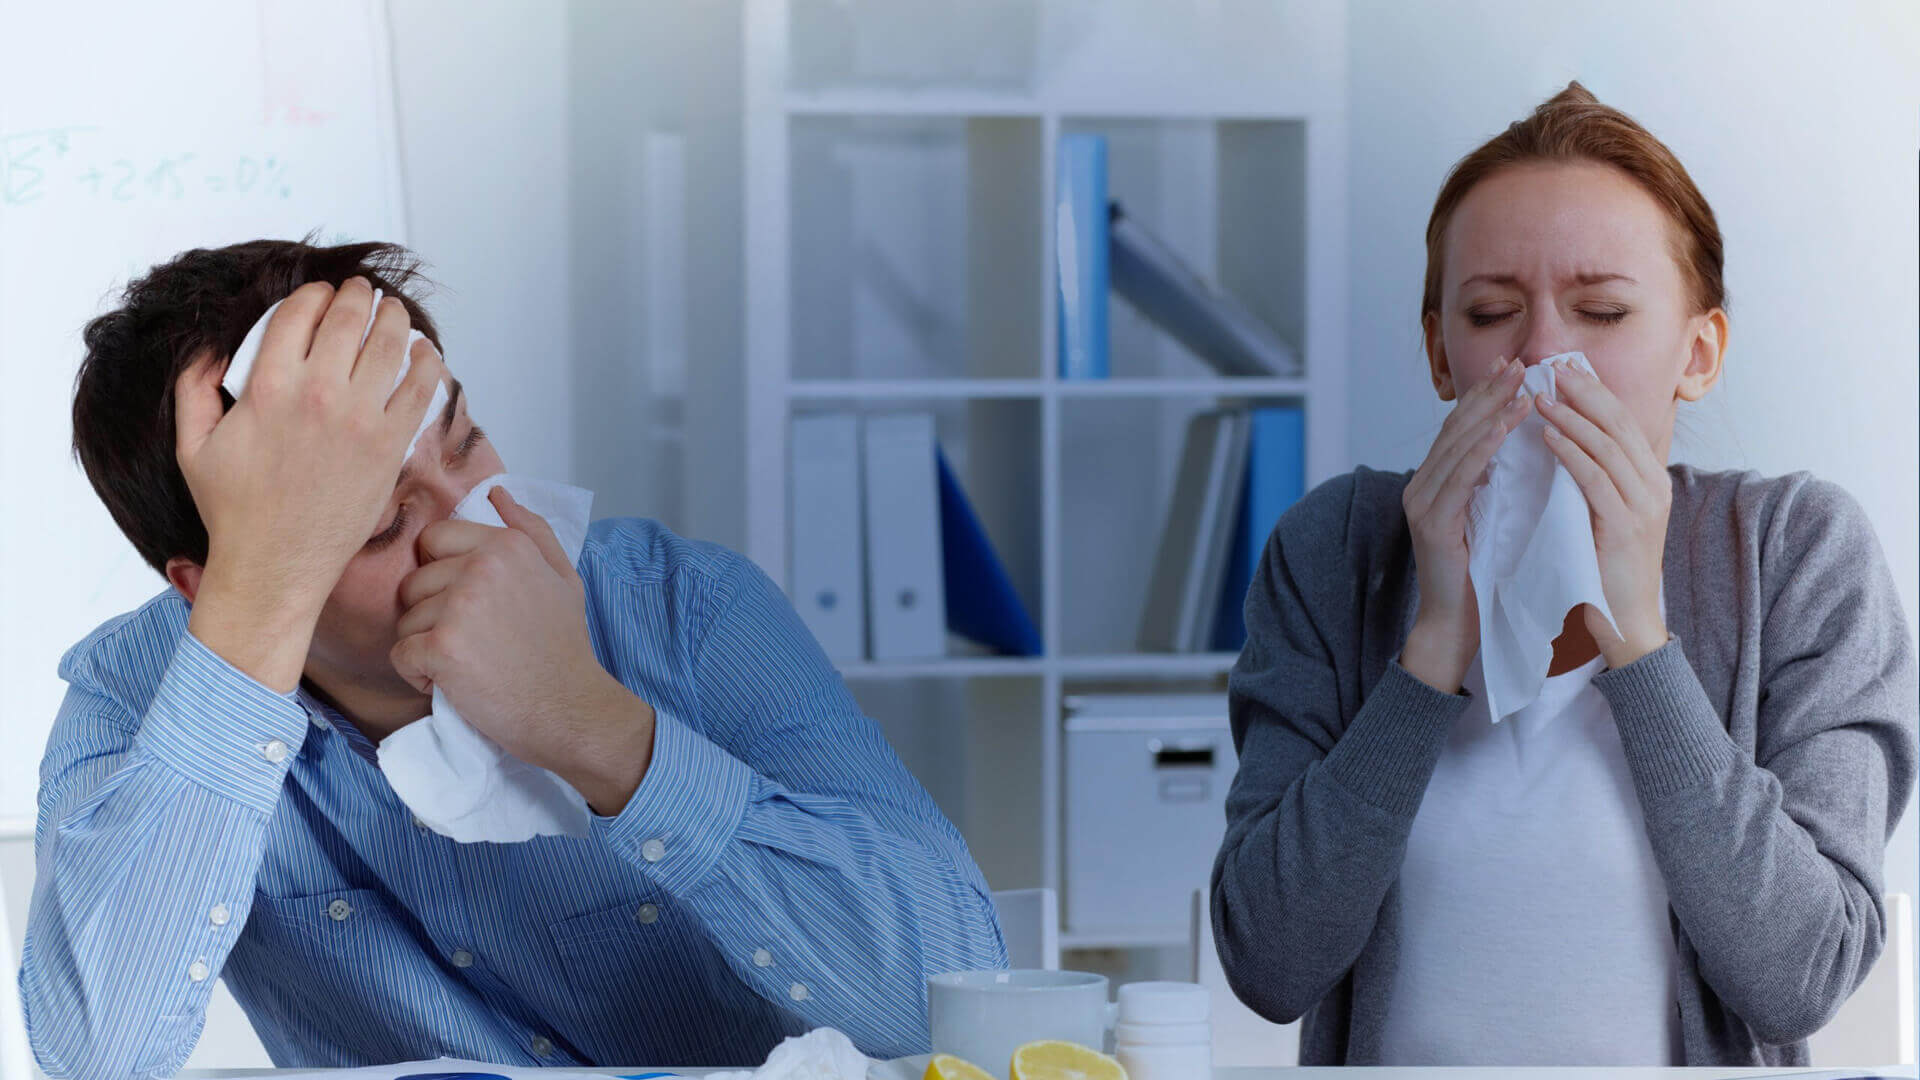 Manage Sick Workers Better With This 3-Stage Framework